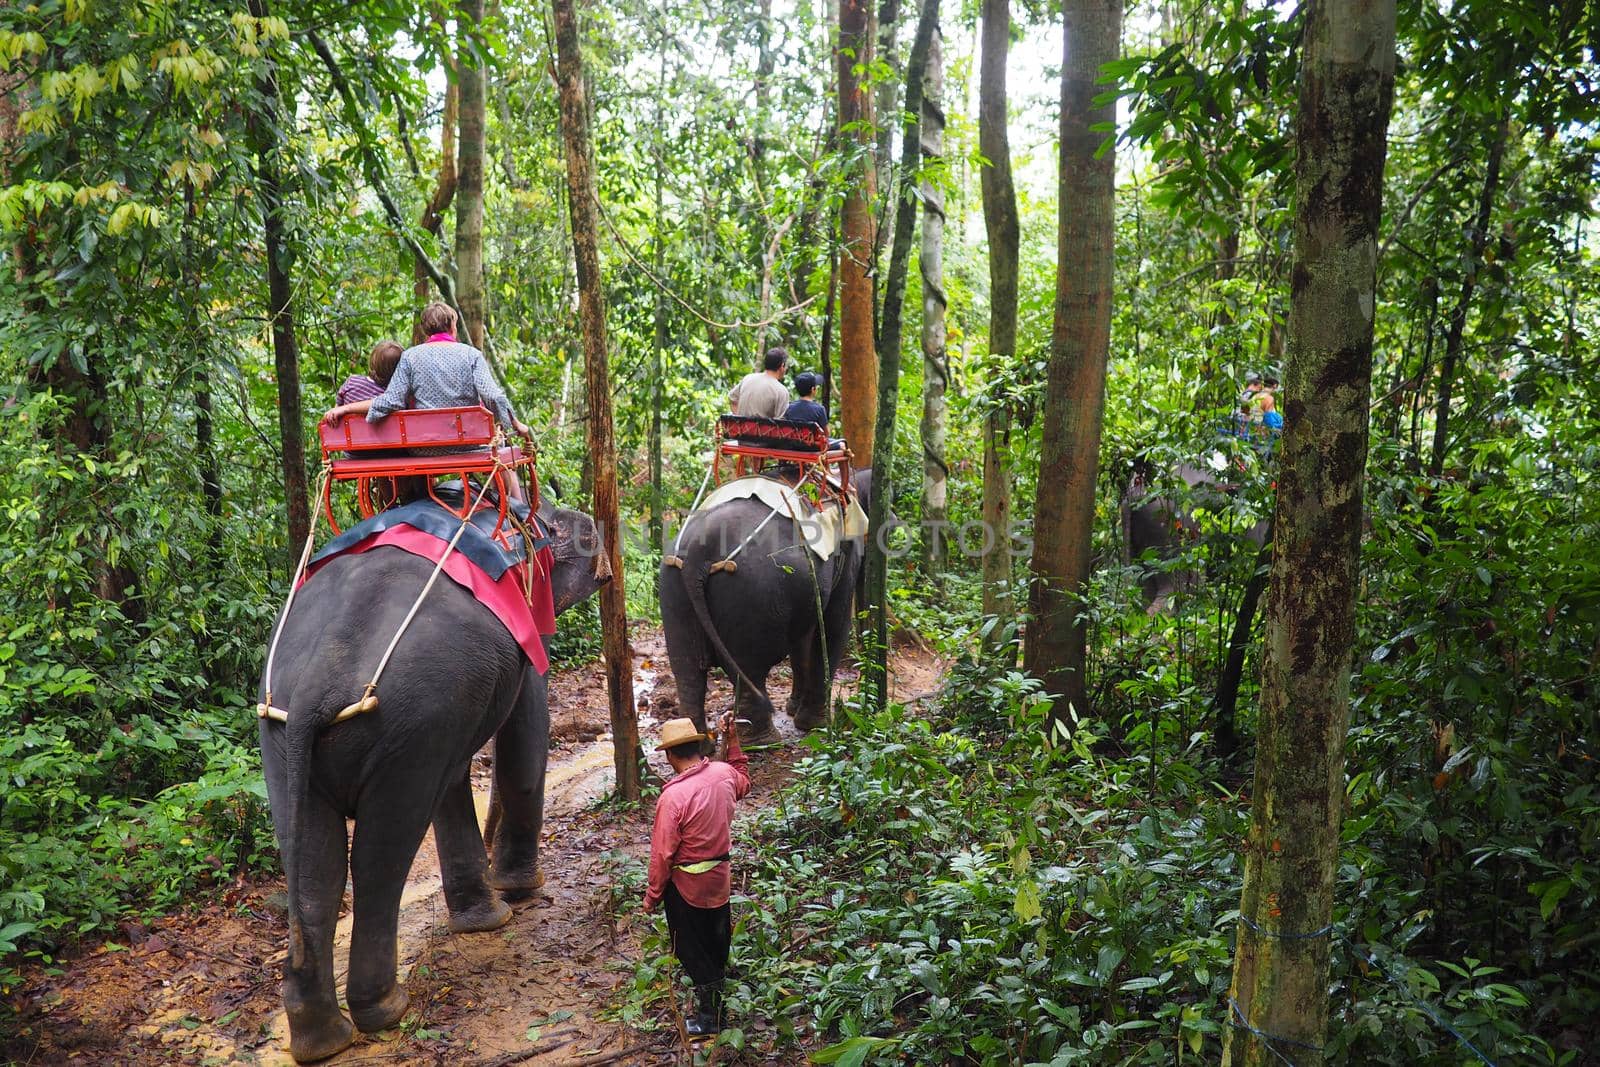 Tourists riding elephants in Thailand by fivepointsix